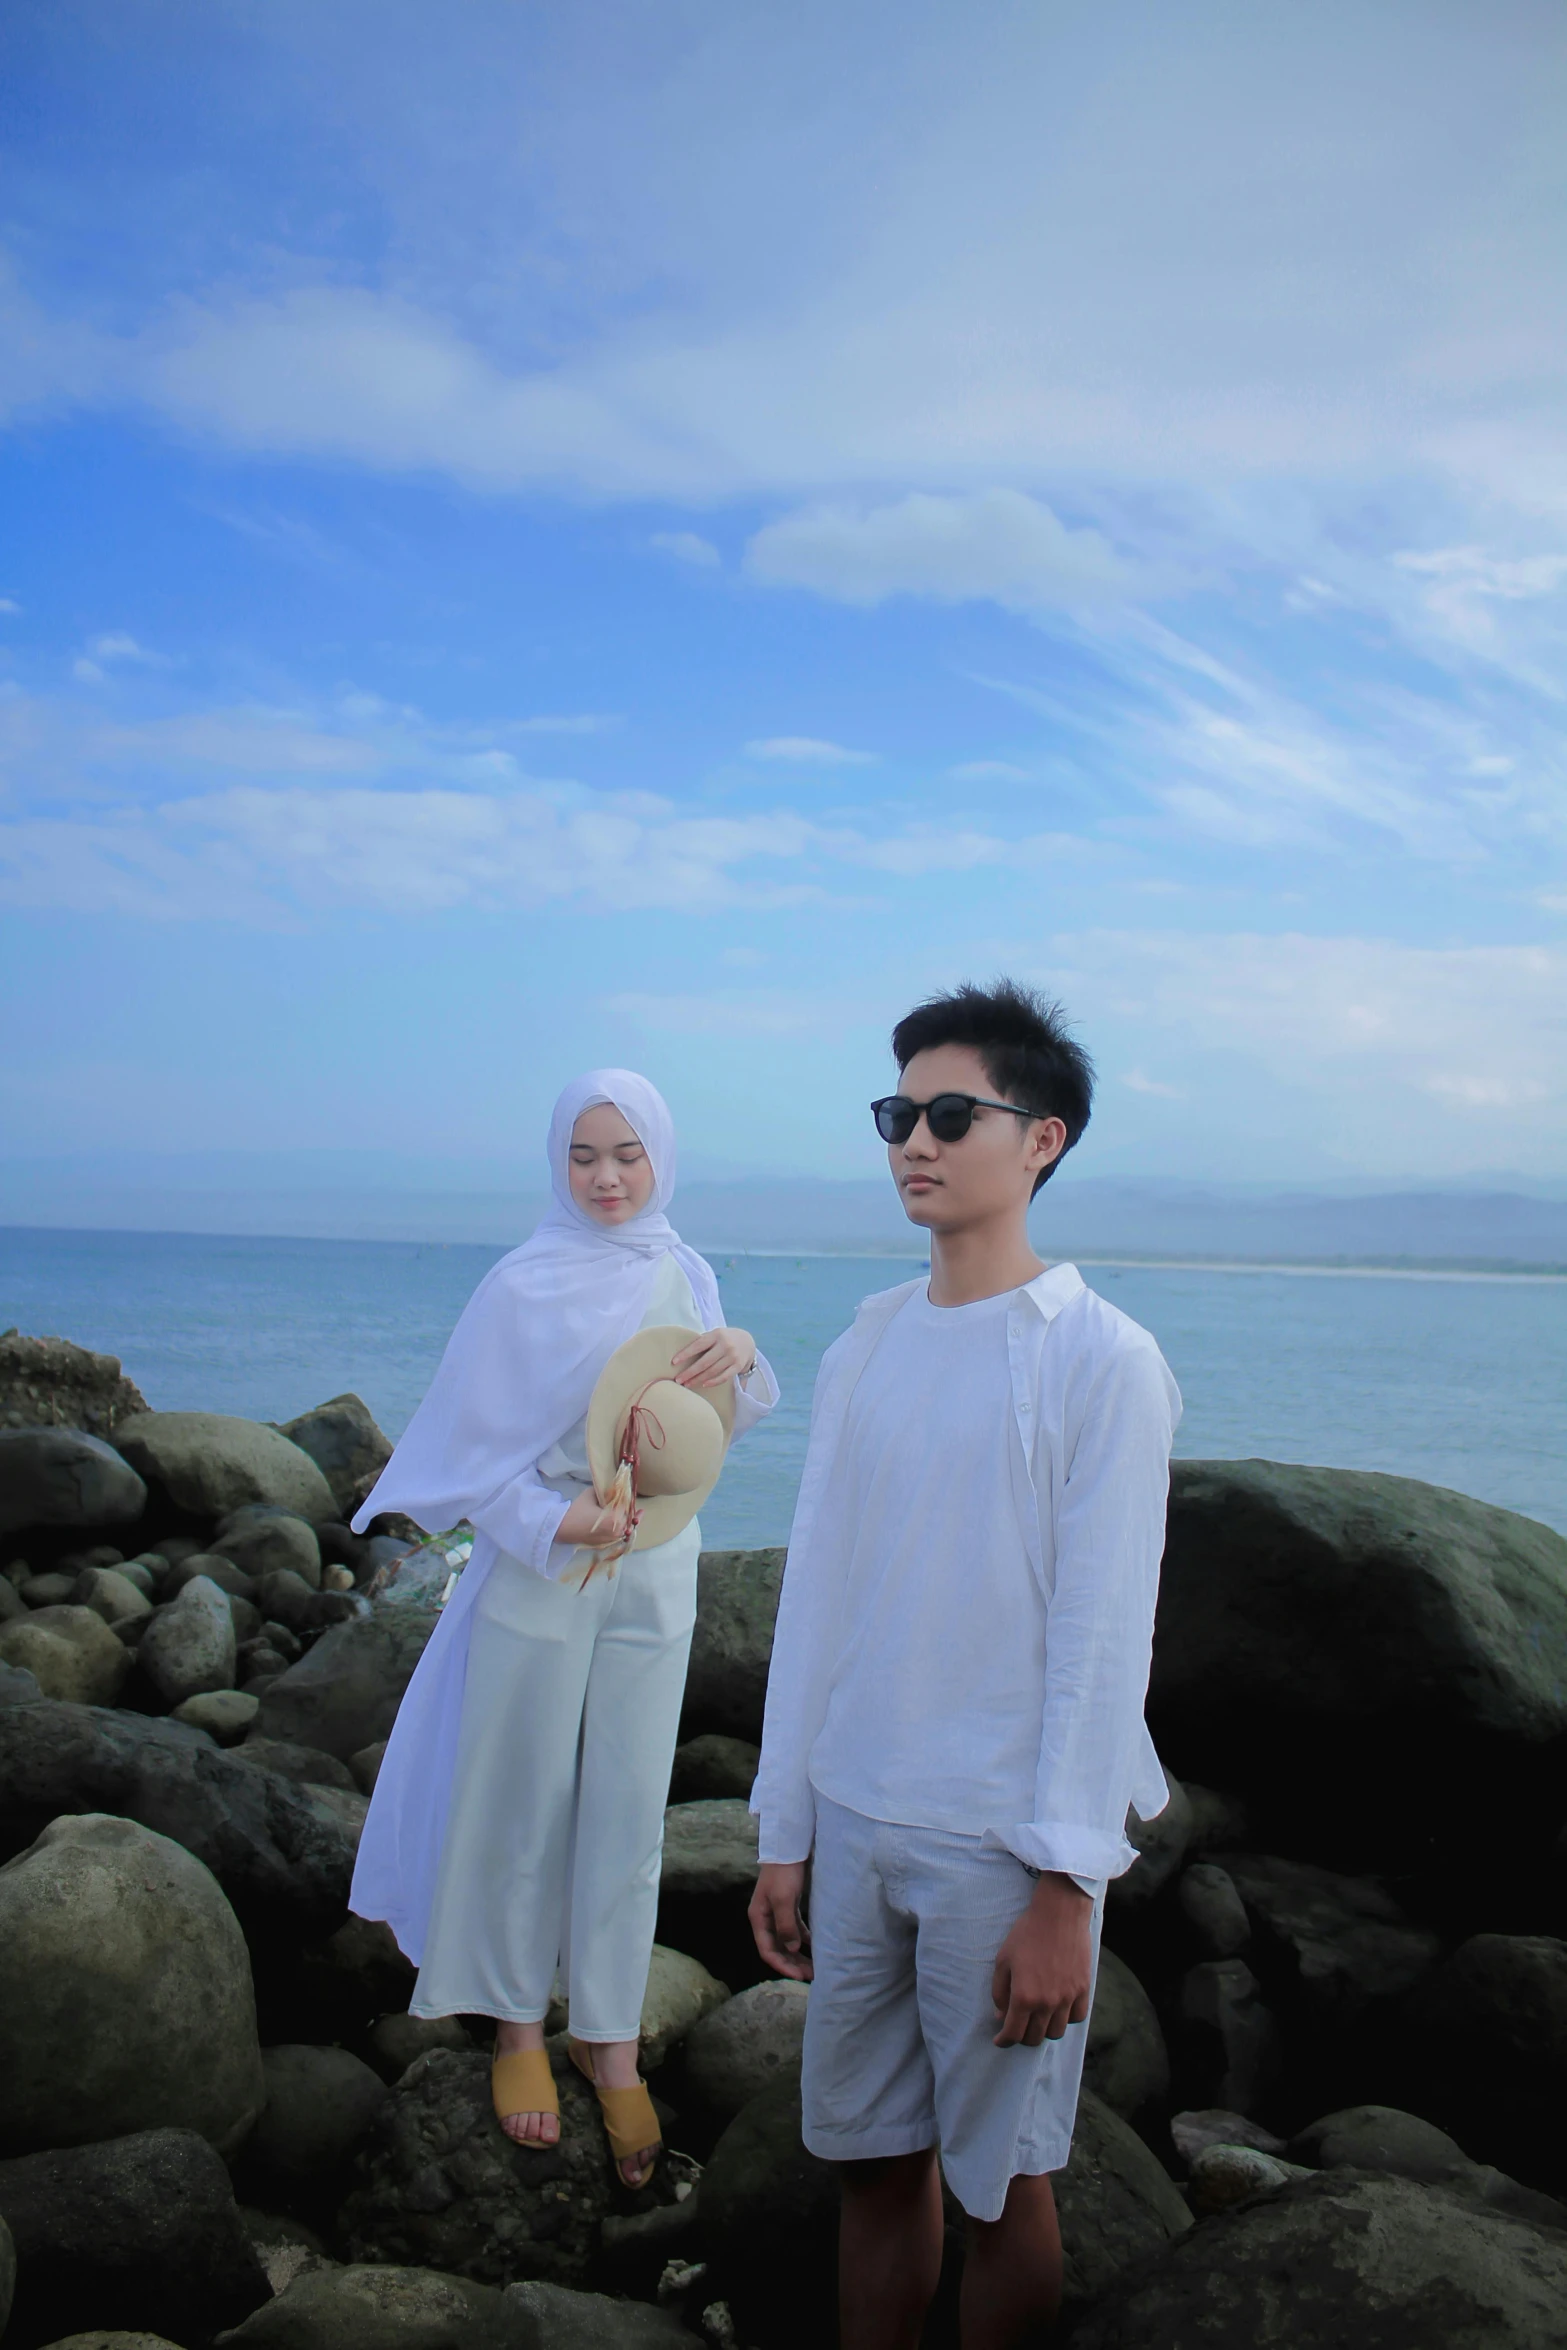 man and woman in white clothing standing on rocks with body in background